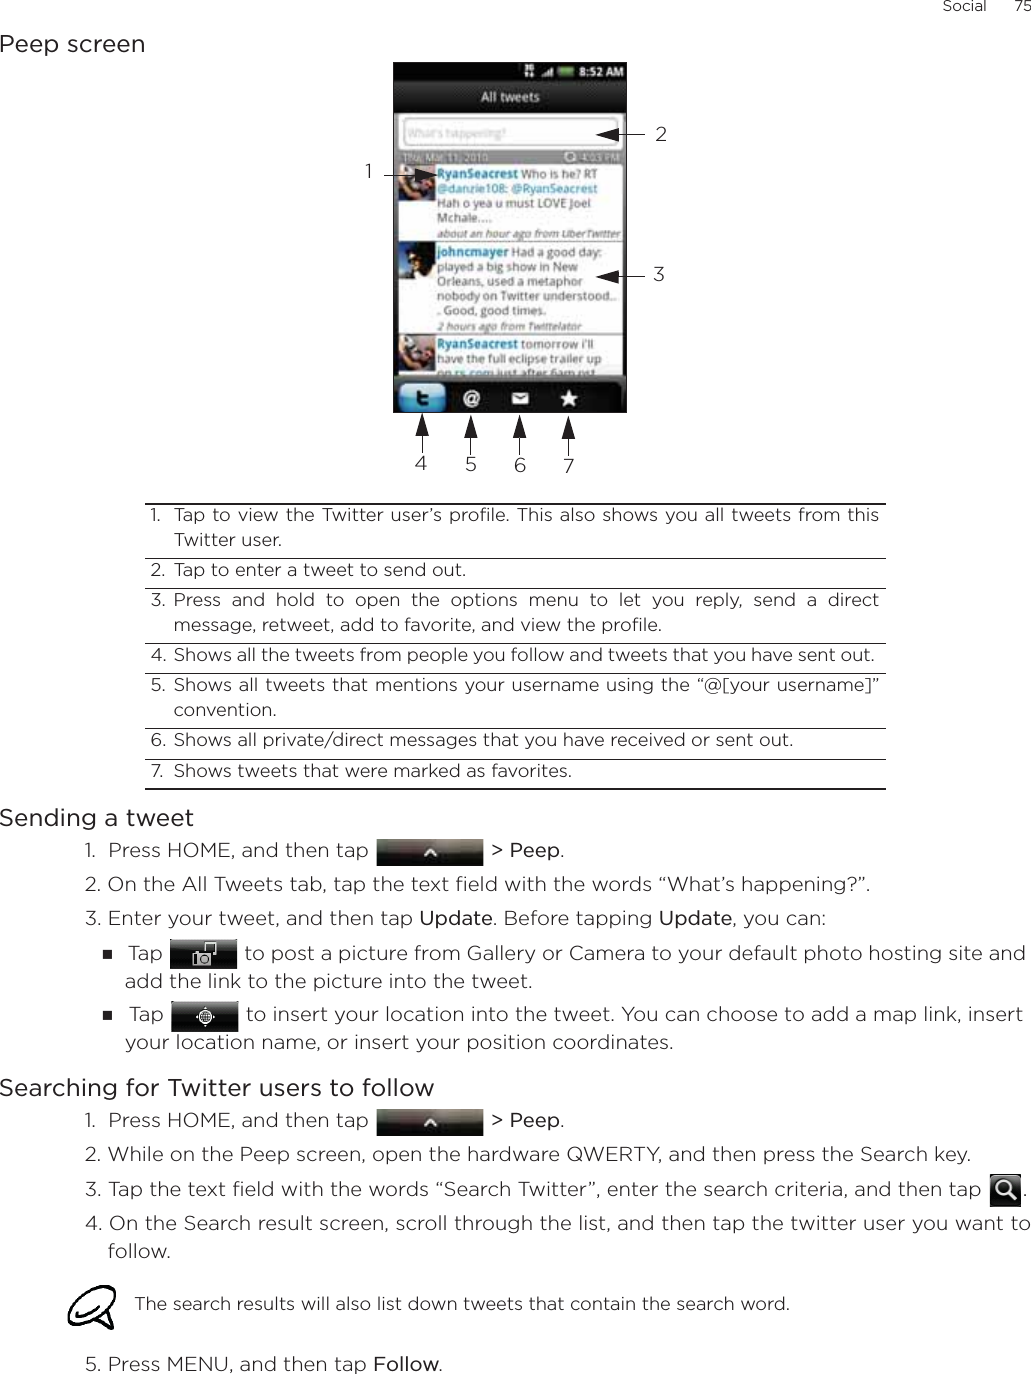 Social      75Peep screenSending a tweet1.  Press HOME, and then tap  &gt; Peep.2. On the All Tweets tab, tap the text field with the words “What’s happening?”.    3. Enter your tweet, and then tap Update. Before tapping Update, you can: Ta p   to post a picture from Gallery or Camera to your default photo hosting site and add the link to the picture into the tweet.Ta p   to insert your location into the tweet. You can choose to add a map link, insert your location name, or insert your position coordinates.Searching for Twitter users to follow1.  Press HOME, and then tap  &gt; Peep.2. While on the Peep screen, open the hardware QWERTY, and then press the Search key. 3. Tap the text field with the words “Search Twitter”, enter the search criteria, and then tap  .4. On the Search result screen, scroll through the list, and then tap the twitter user you want tofollow. 5. Press MENU, and then tap Follow. 1. Tap to view the Twitter user’s profile. This also shows you all tweets from thisTwitter user.  2. Tap to enter a tweet to send out. 3. Press and hold to open the options menu to let you reply, send a directmessage, retweet, add to favorite, and view the profile.4. Shows all the tweets from people you follow and tweets that you have sent out. 5. Shows all tweets that mentions your username using the “@[your username]”convention.6. Shows all private/direct messages that you have received or sent out. 7. Shows tweets that were marked as favorites.The search results will also list down tweets that contain the search word. 1234567